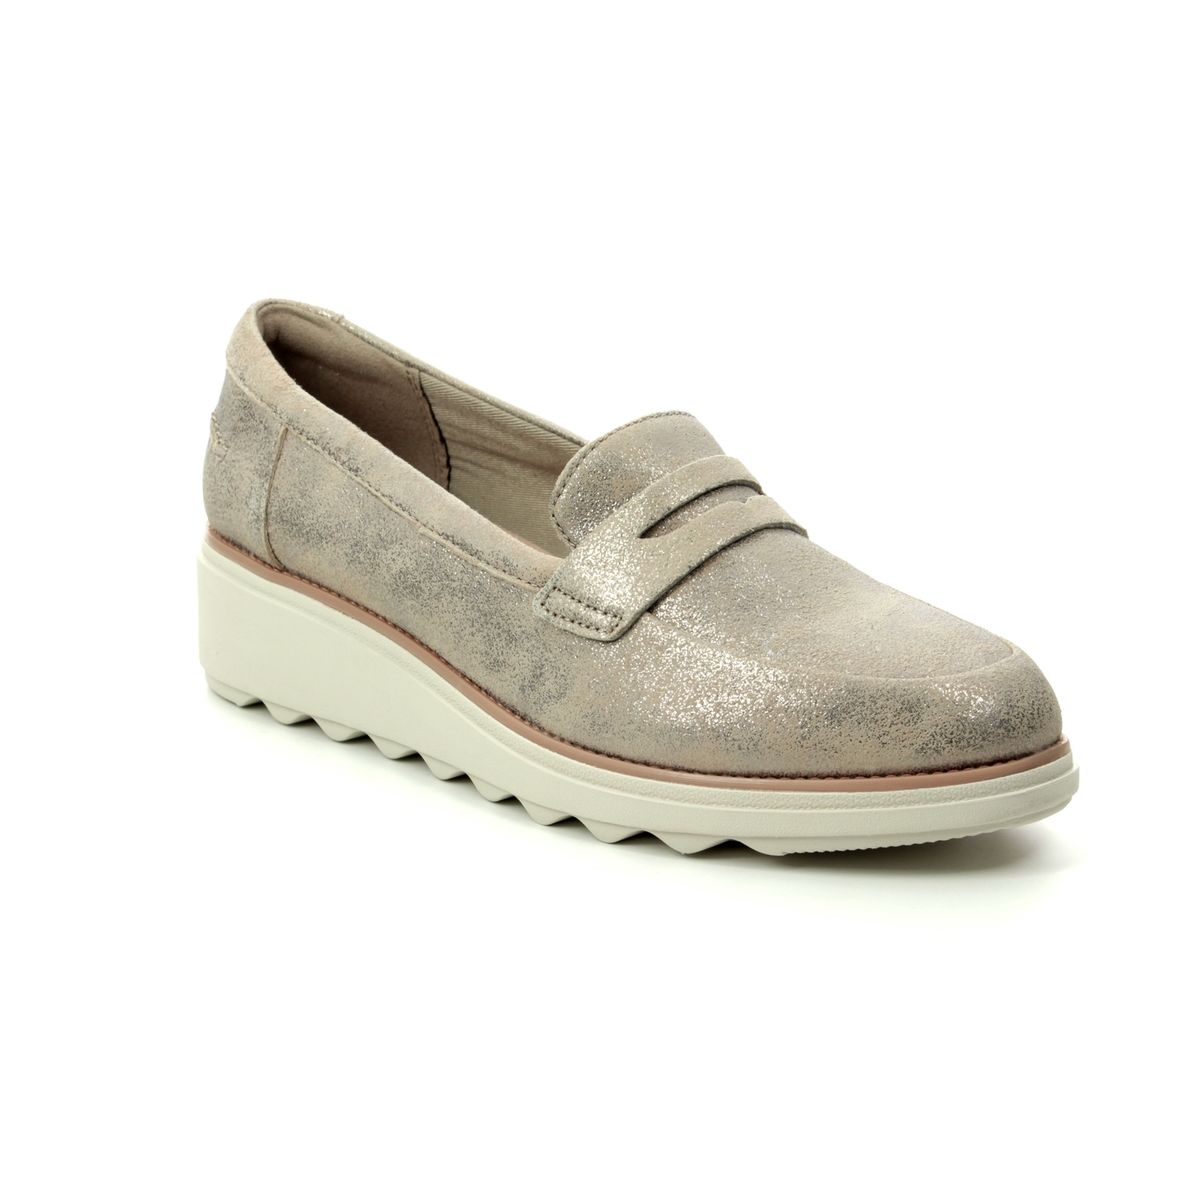 clarks sharon ranch pewter